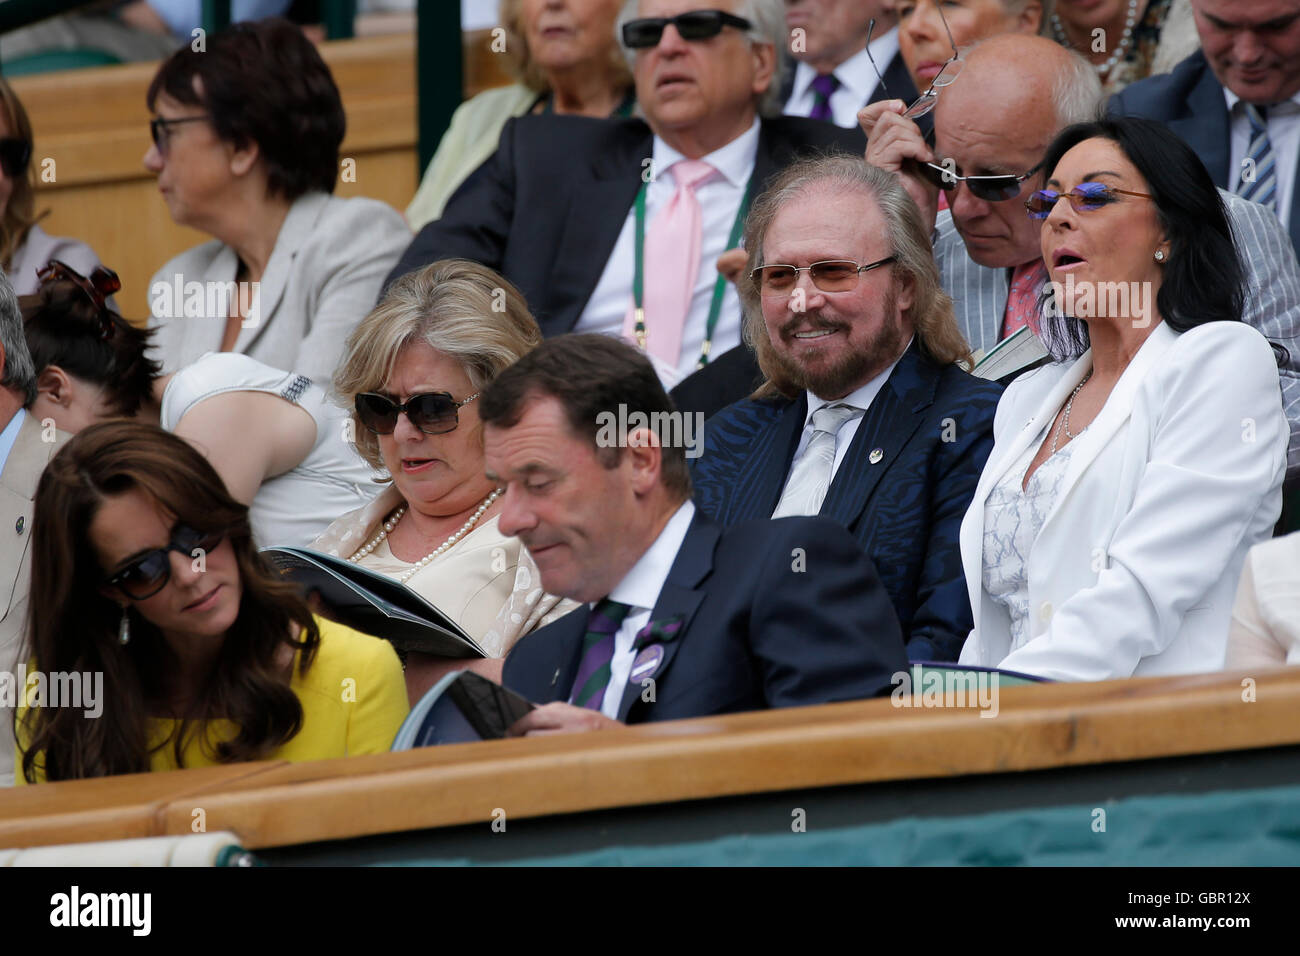 London, UK. 07th July, 2016. The Duchess Of Cambridge, Barry & Linda Gibb The Wimbledon Championships 2016 The Wimbledon Championships 2016 The All England Tennis Club, Wimbledon, London, England 07 July 2016 Ladies' Singles Semi Finals The All England Tennis Club, Wimbledon, London, England 2016 © Allstar Picture Library/Alamy Live News Credit:  Allstar Picture Library/Alamy Live News Stock Photo